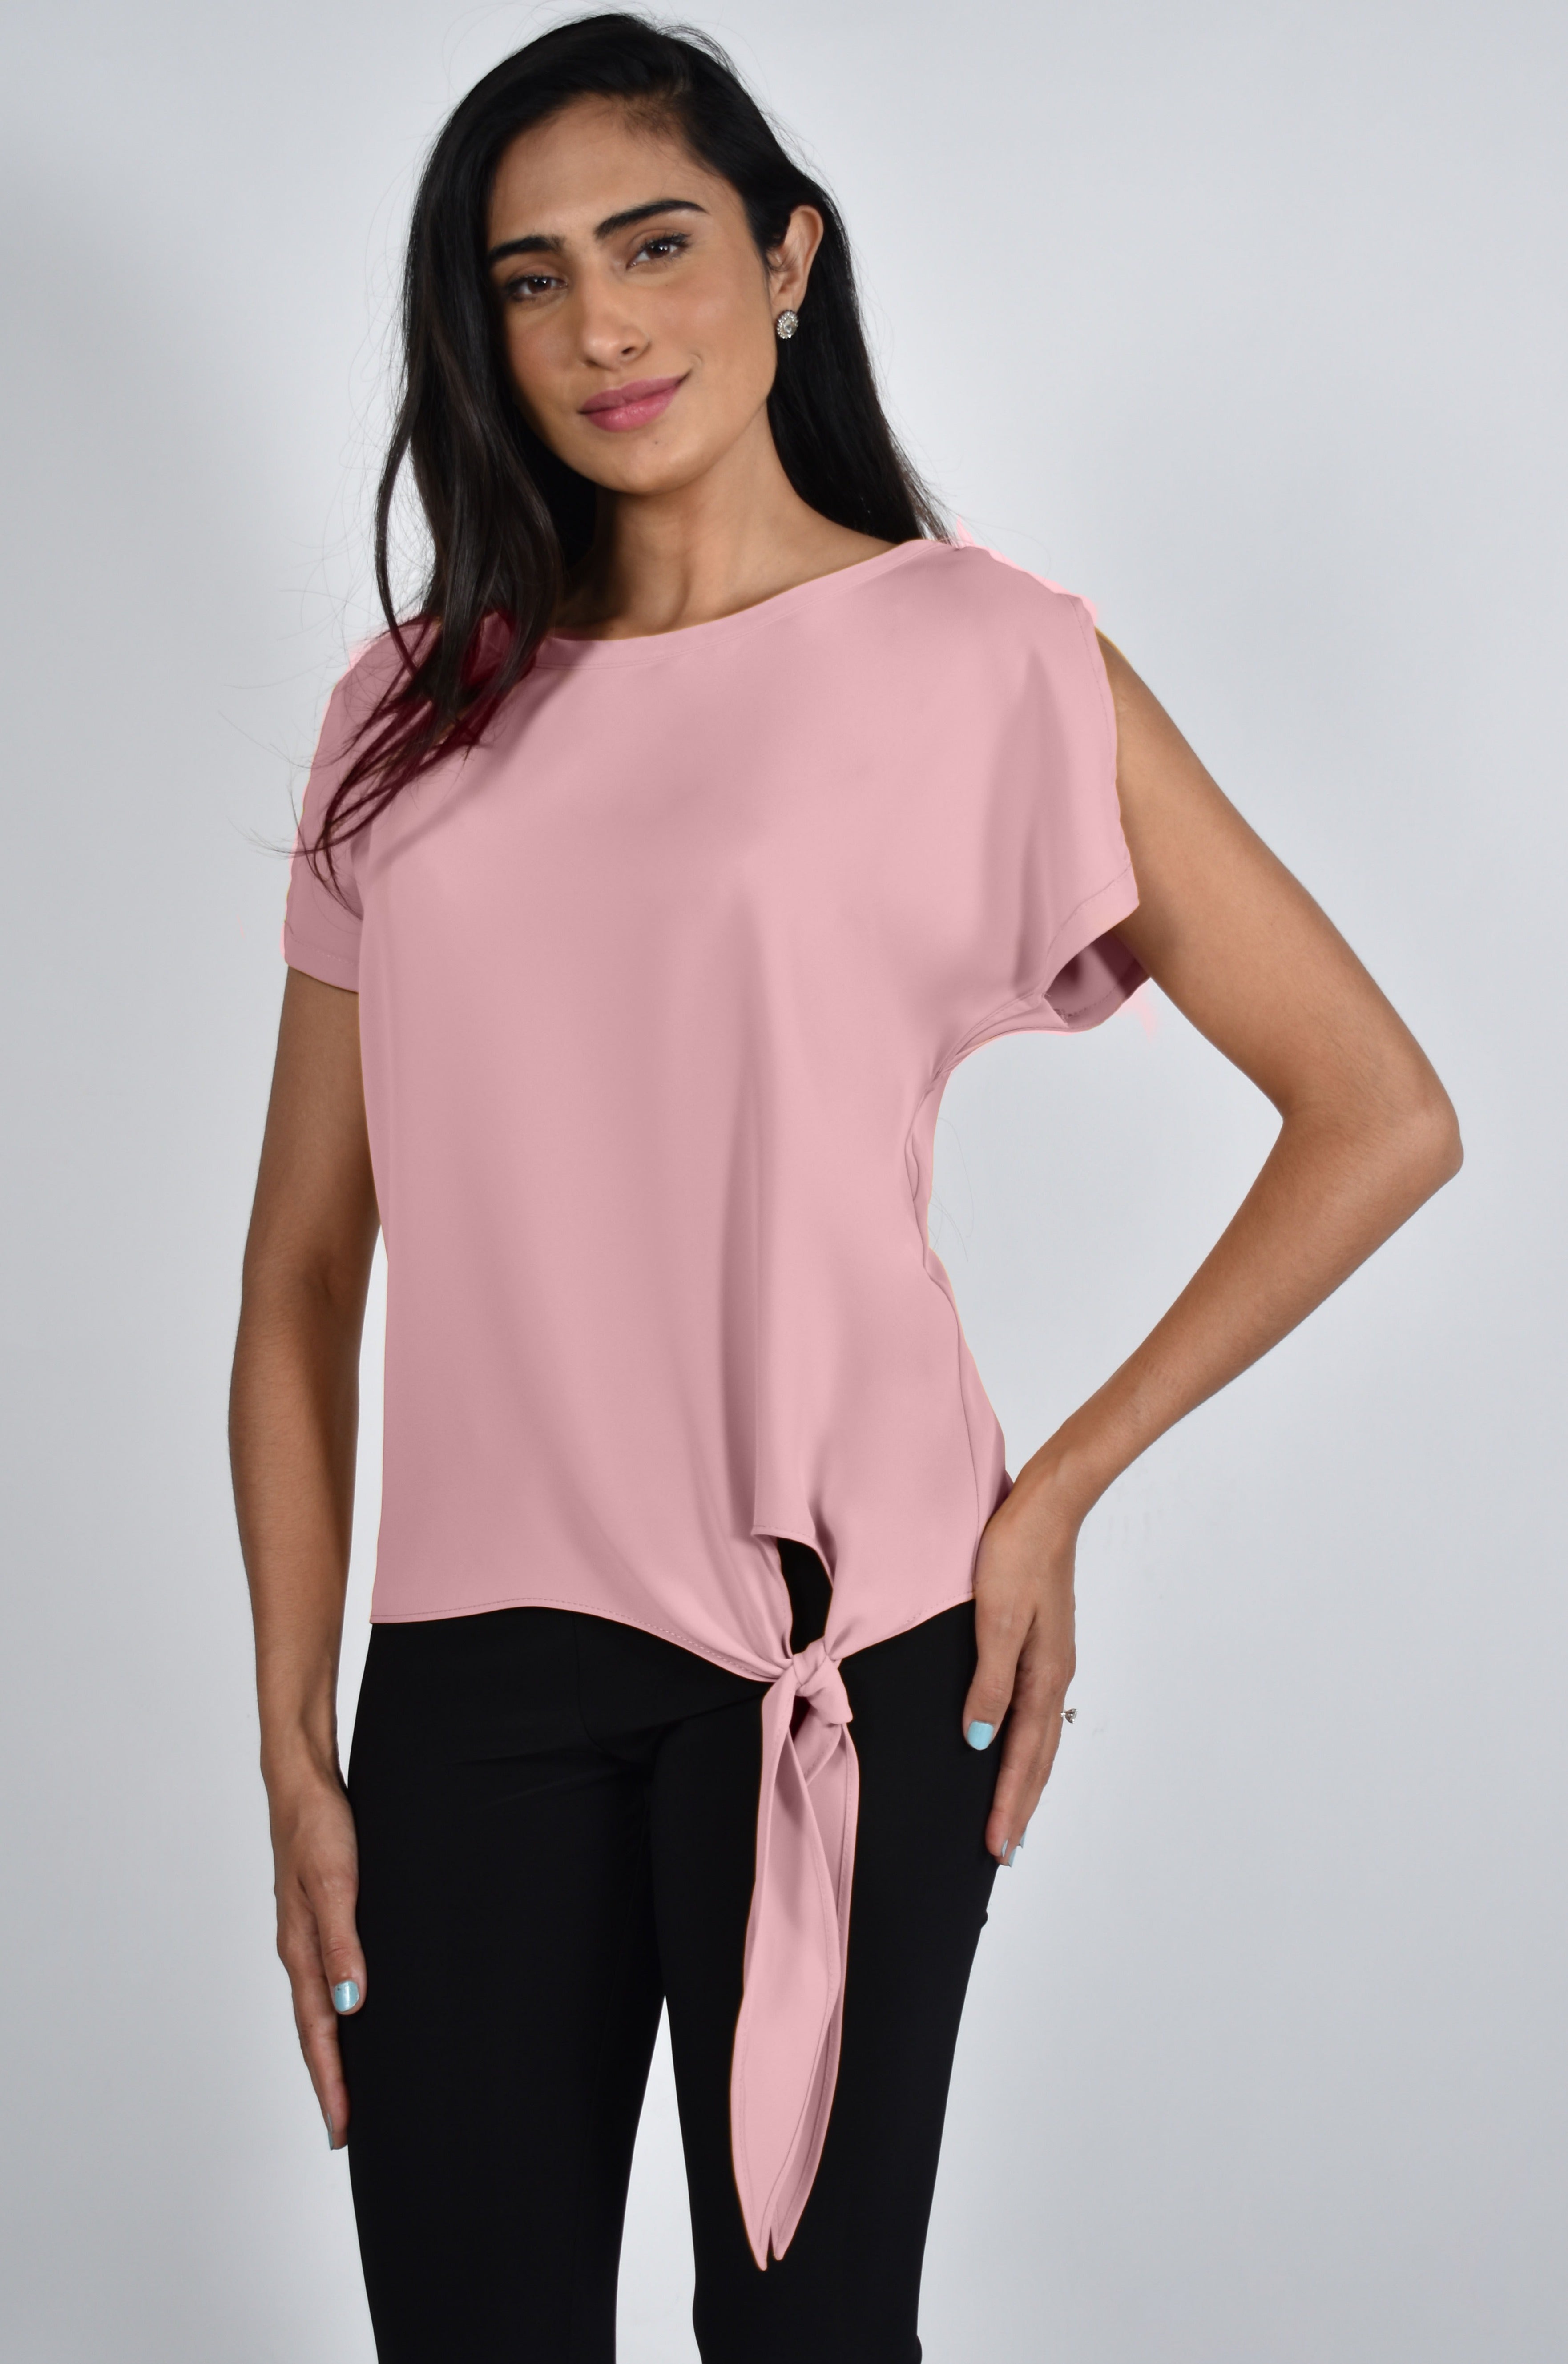 Women's Clothing FRANK LYMAN (181224) Short Sleeve Top with Side Tie in BLUSH